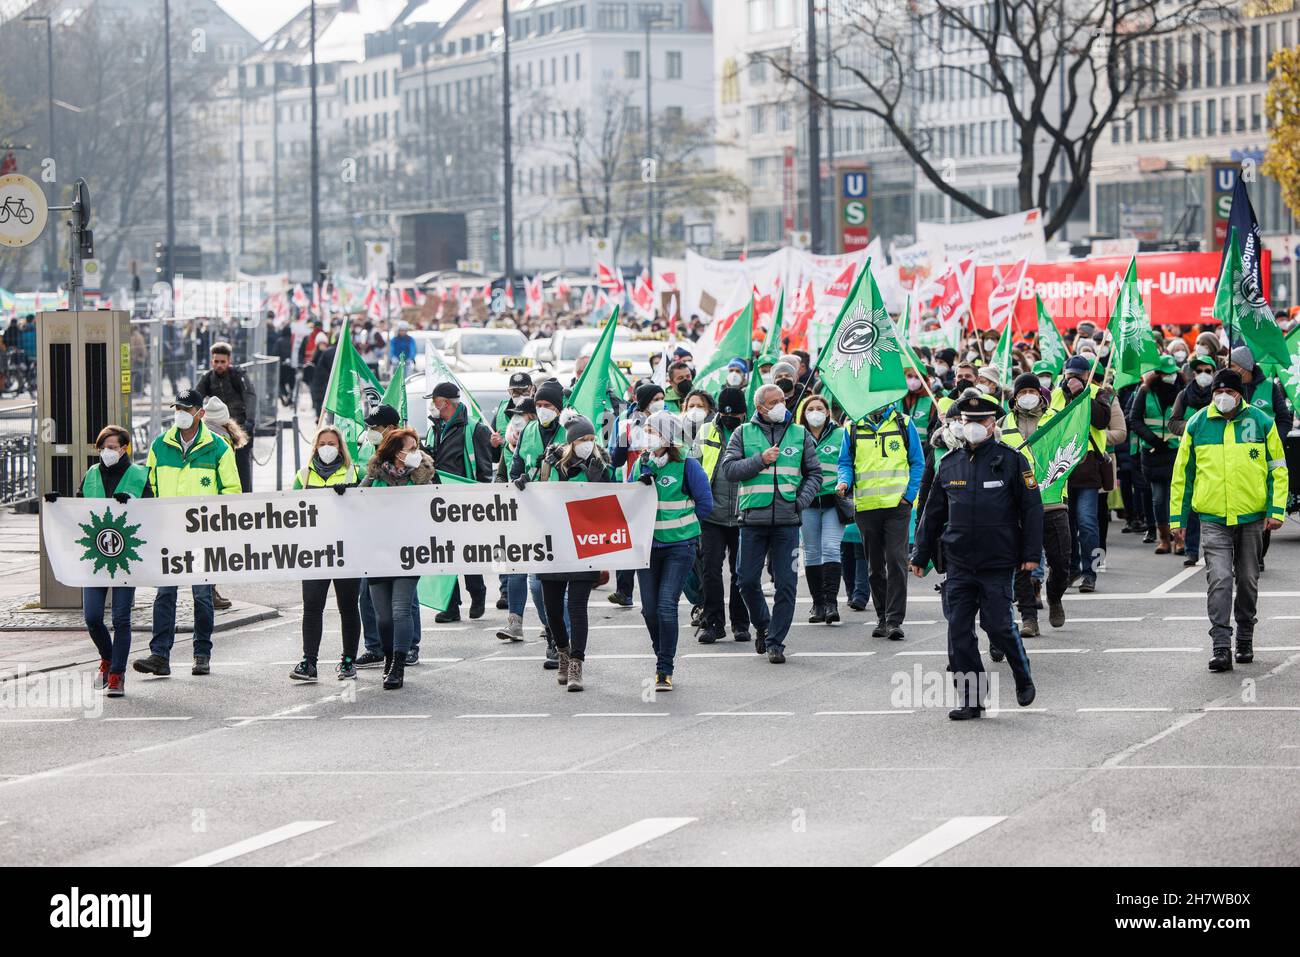 Munich, Germany. 25th Nov, 2021. Demonstration participants hold a banner with the inscription 'GdP - Sicherheit ist MehrWert!' during the demonstration procession of the police union, Verdi and the industrial union Bauen- Agrar-Umwelt (IG Bau AU) from the Theresienwiese to the final rally at the Ministry of Finance. Fair goes differently! - Verdi' in front of it. Credit: Matthias Balk/dpa/Alamy Live News Stock Photo